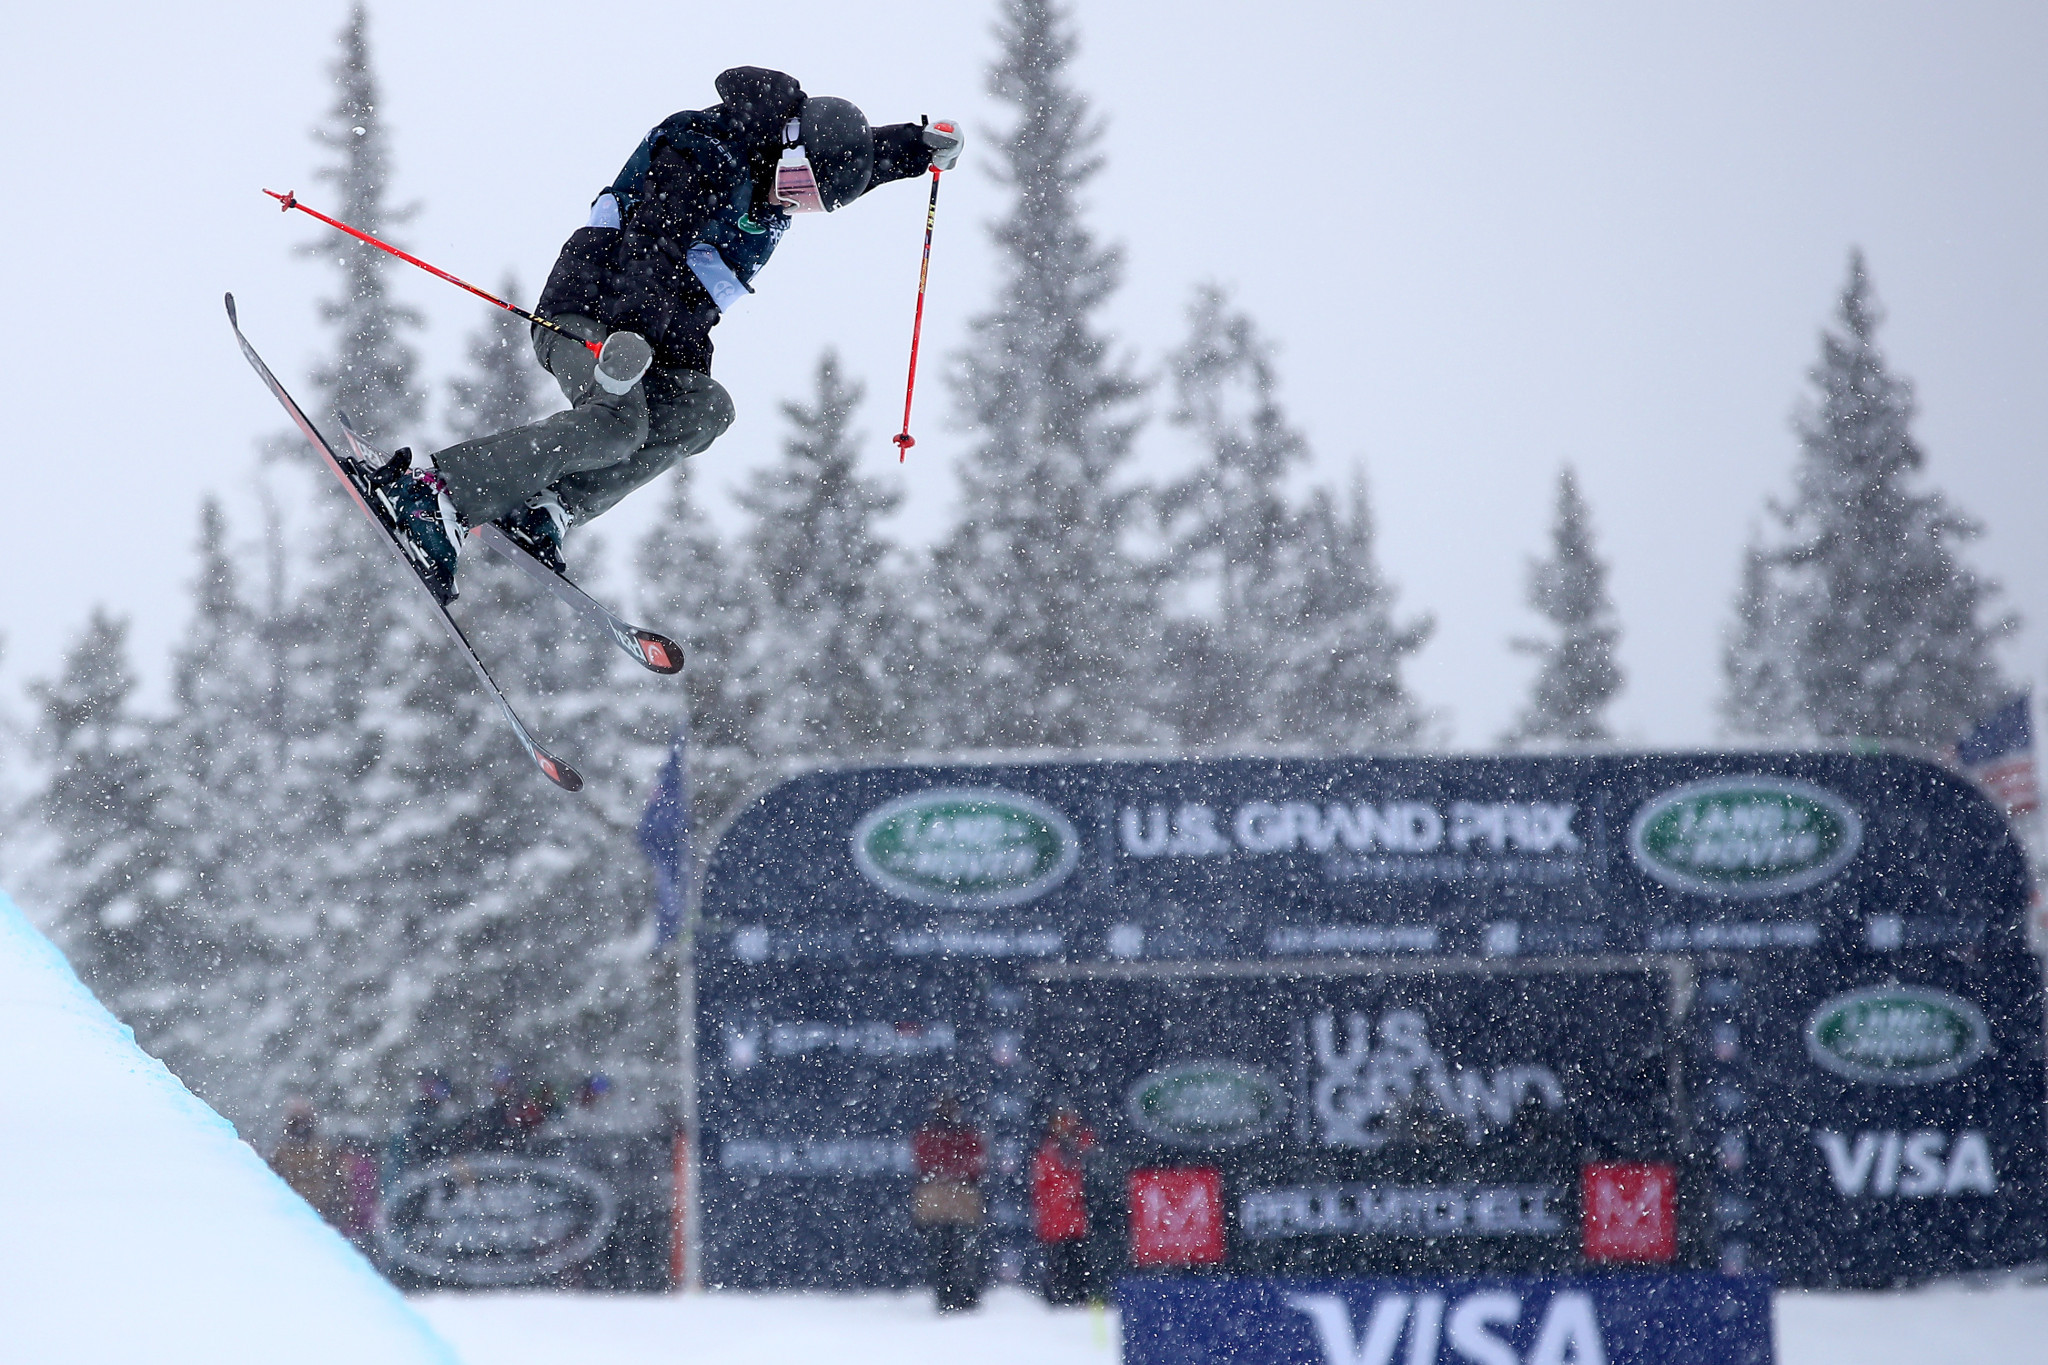 Zoe Atkin produced a superb performance at the FIS Freestyle Skiing Halfpipe World Cup at Copper Mountain ©Getty Images